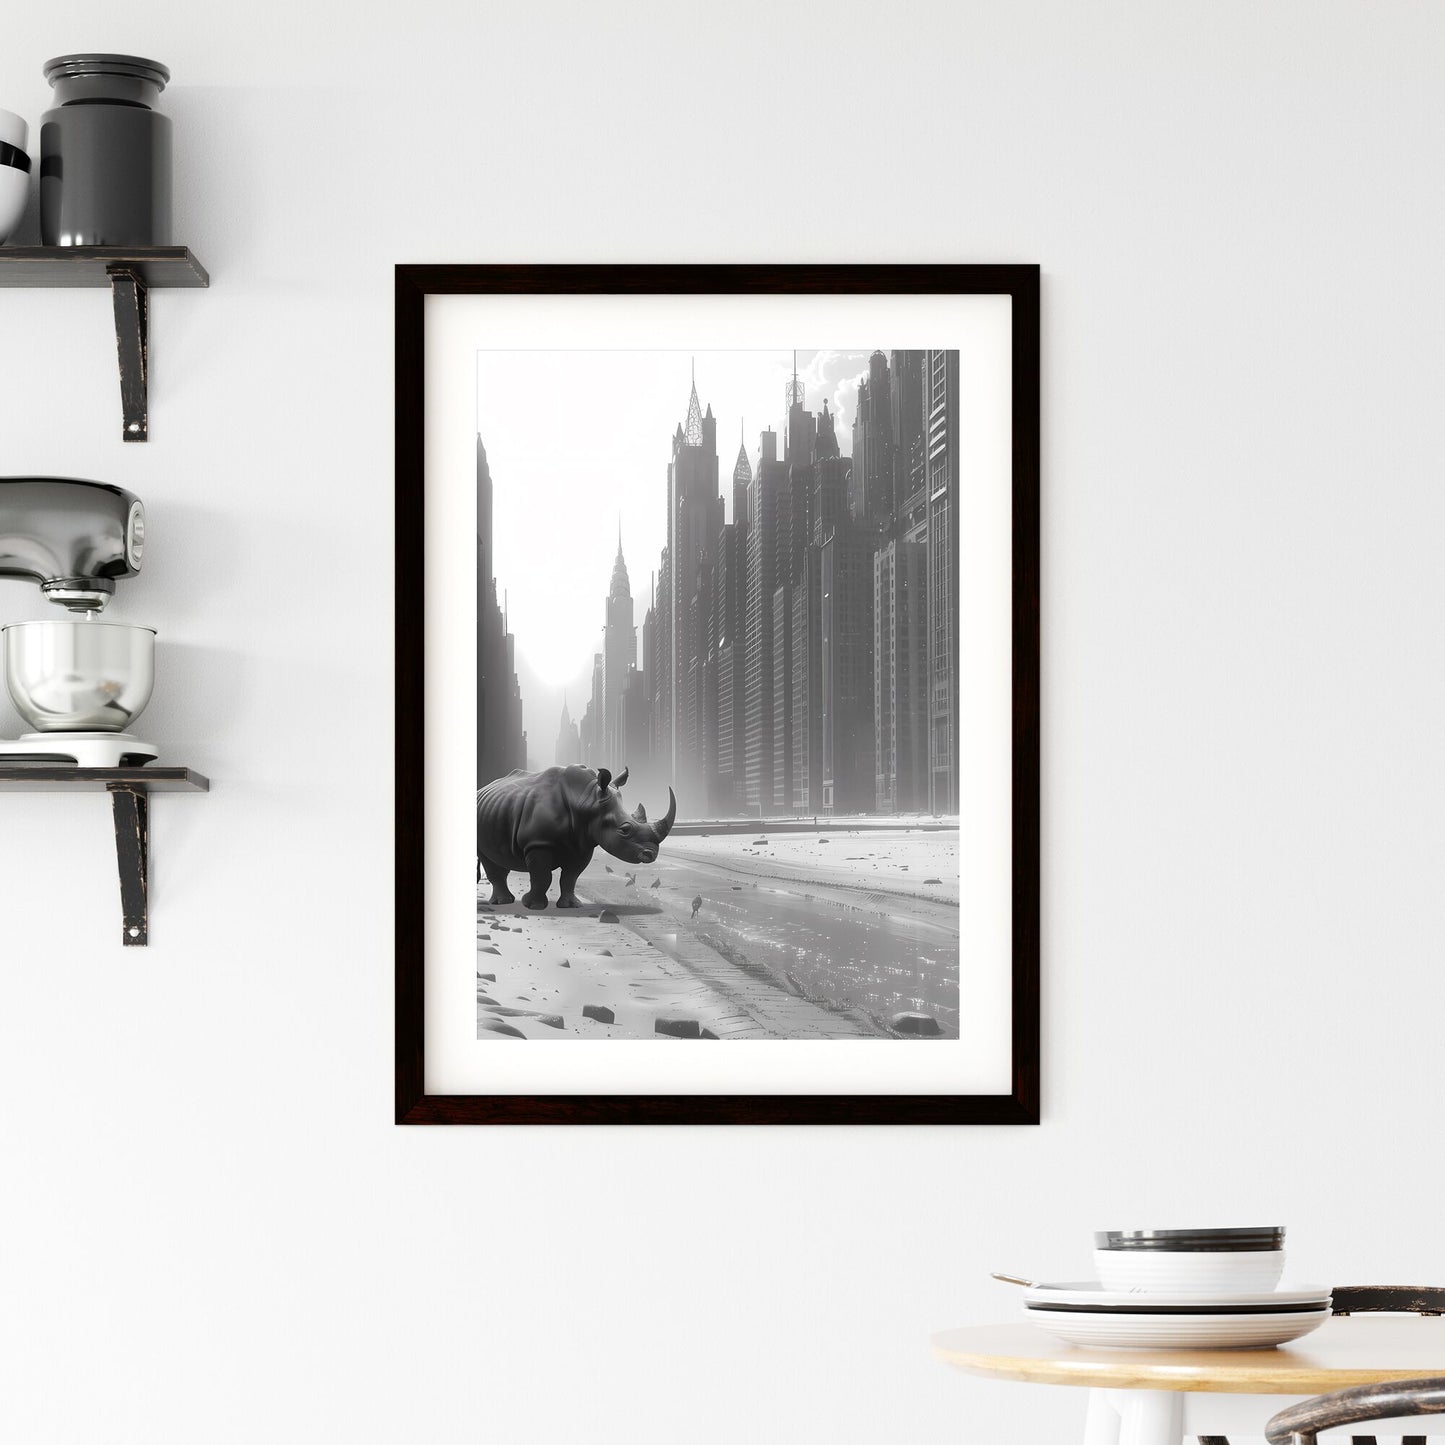 A Rhinoceros walking across a street next to tall buildings, a black and white photo, no man, featured on cg society, surrealism, surrealist, ambient occlusion, behance hd ,Water - a rhinoceros standing in a city Default Title